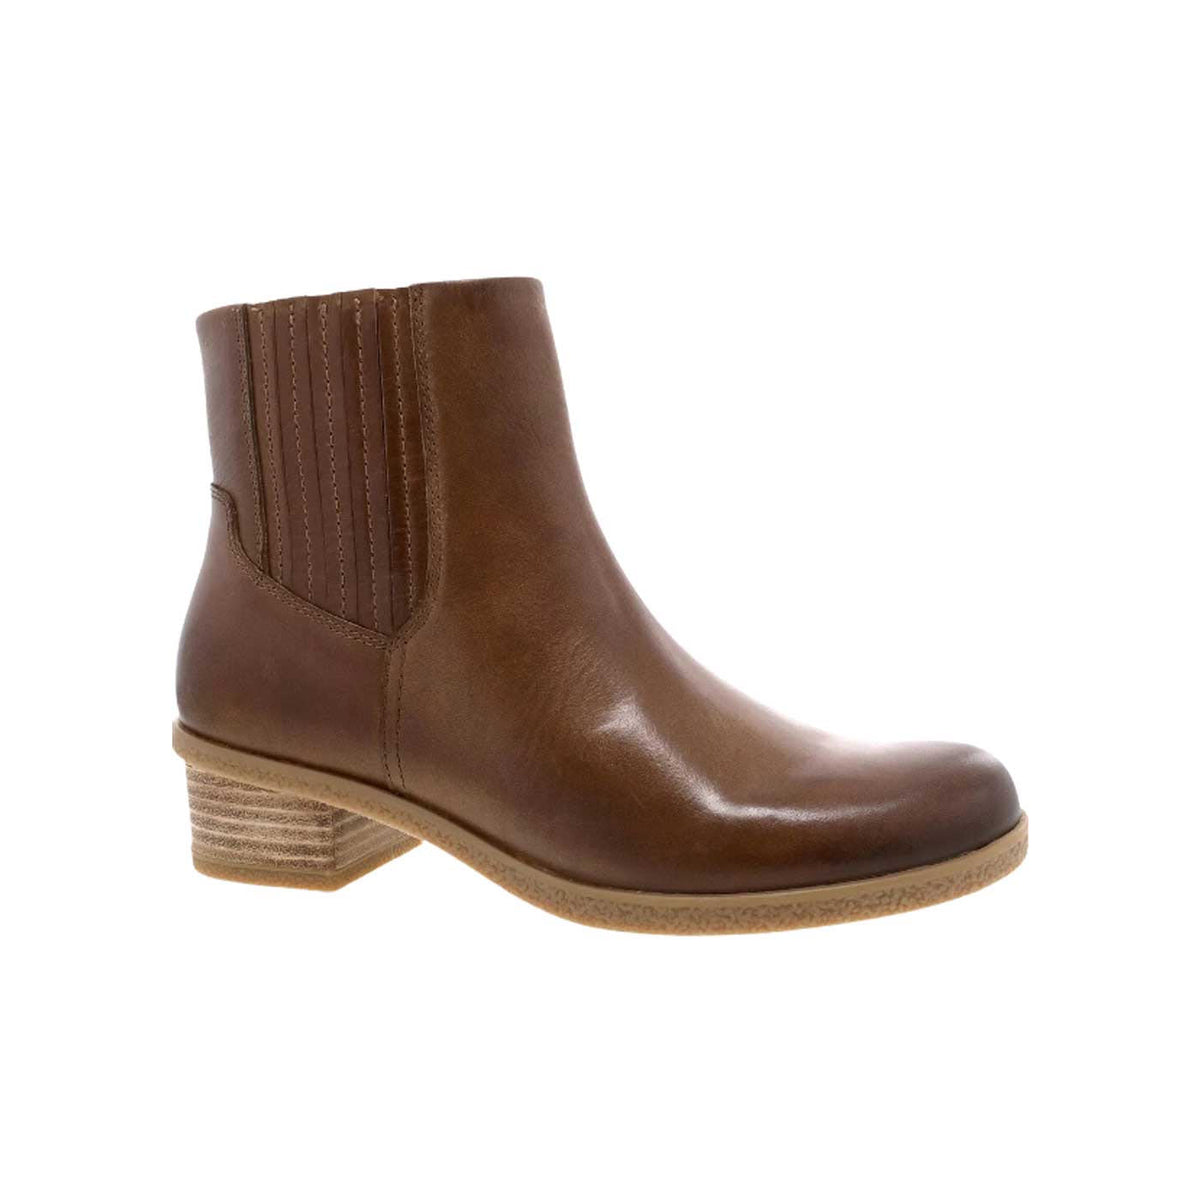 A single tan burnished leather Dansko Daisie ankle boot with elastic side panels and a low, wooden heel, isolated on a white background.